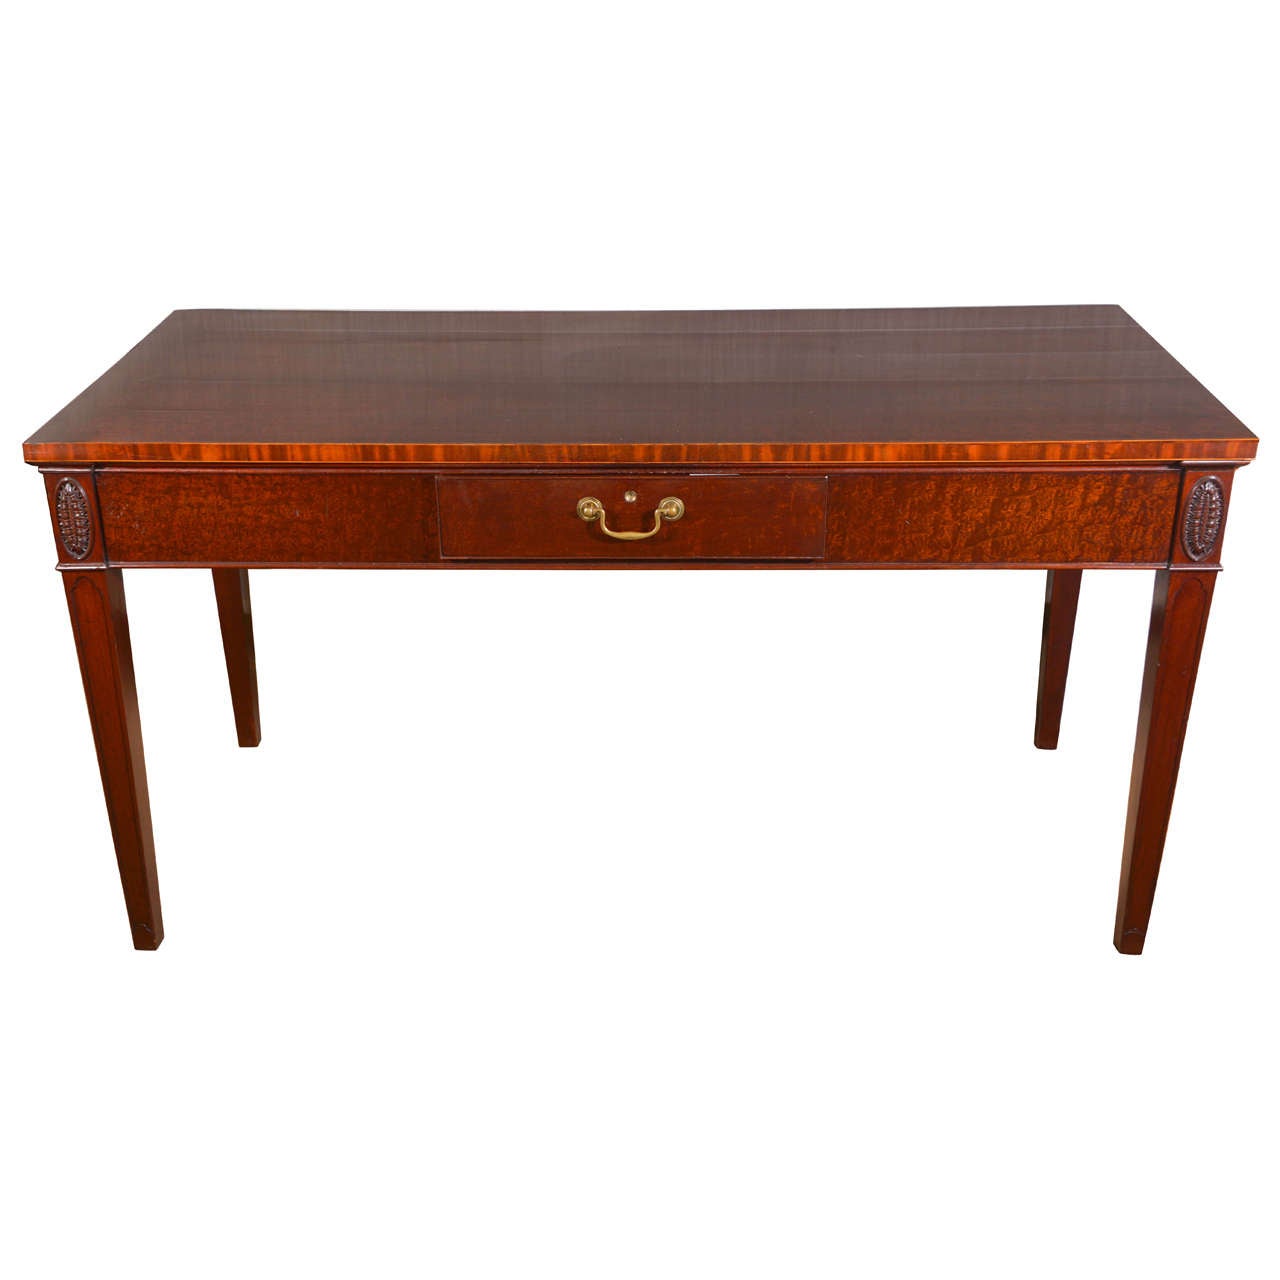 19th c. English Table Desk. For Sale